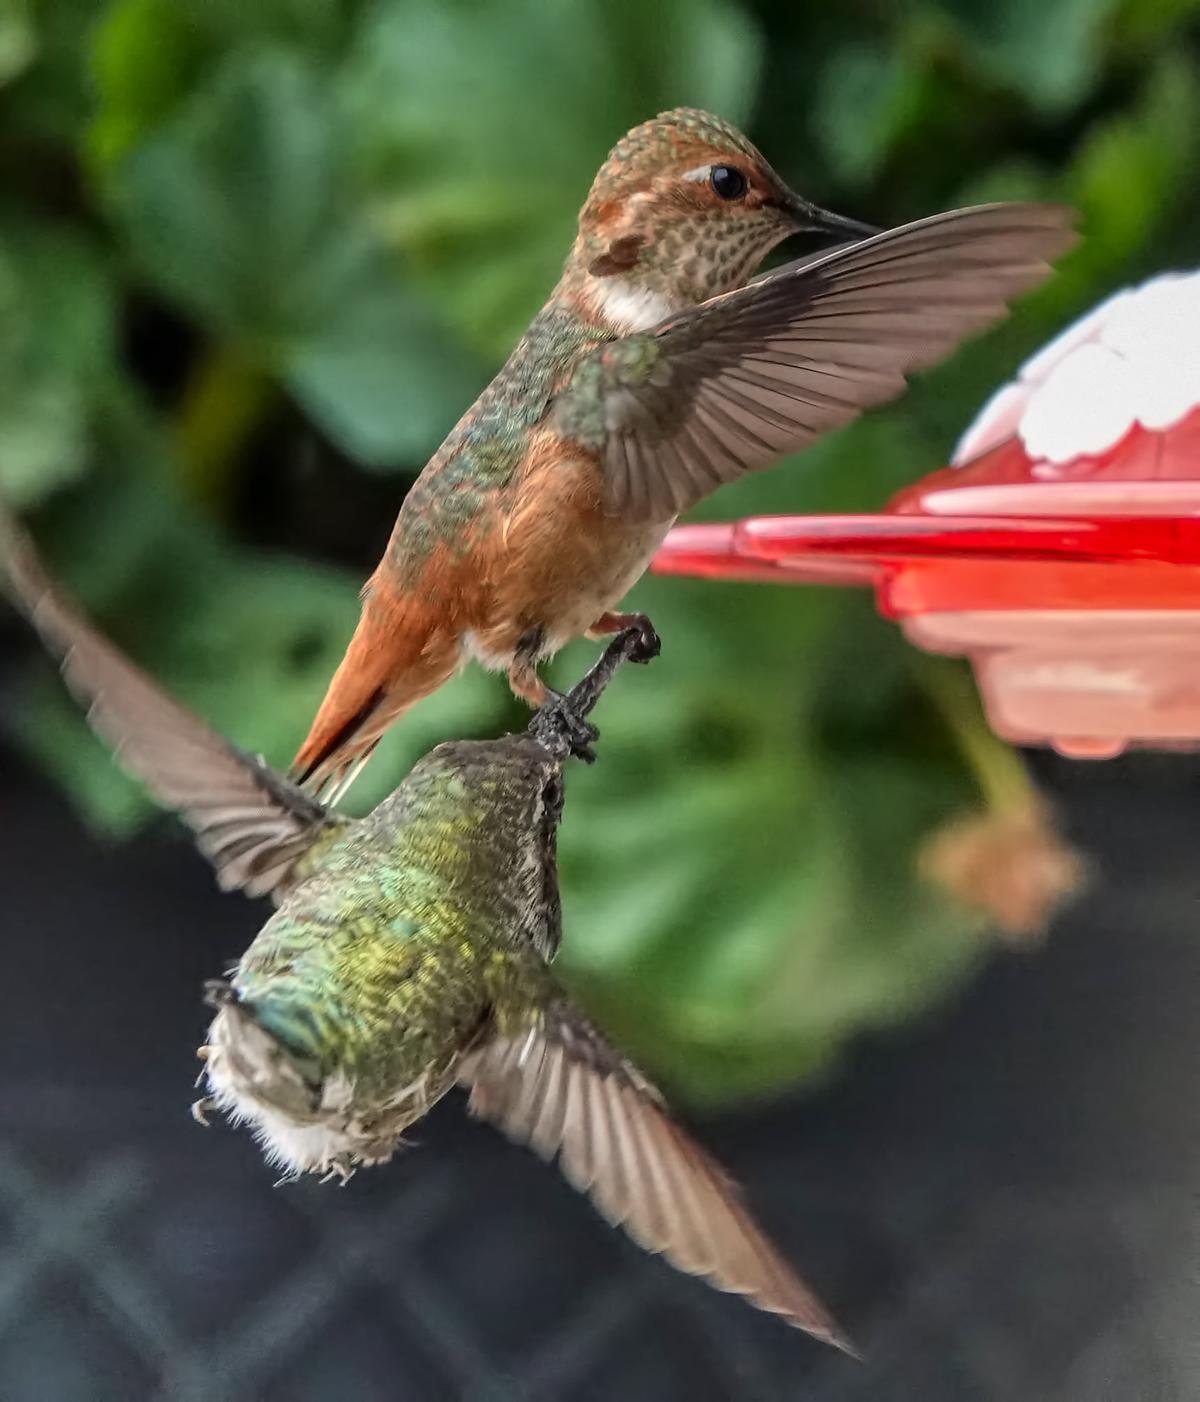 Williams's "one-in-a-million" shot of one hummingbird grasping the beak of another. (Courtesy of <a href="https://www.hummingbirdsbyterry.com/">Terry Williams</a>)